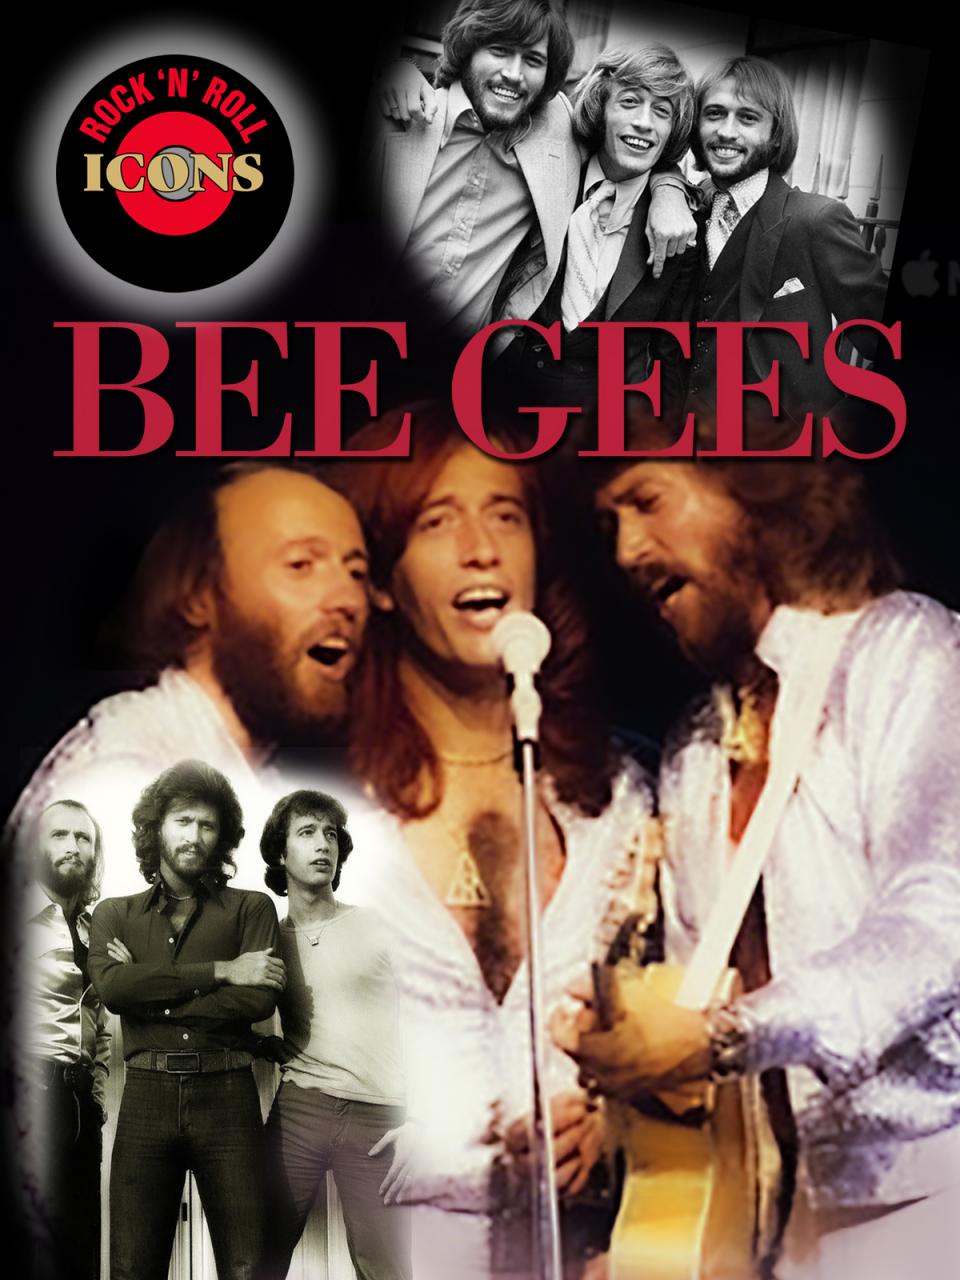 Rock Icons: Bee Gees